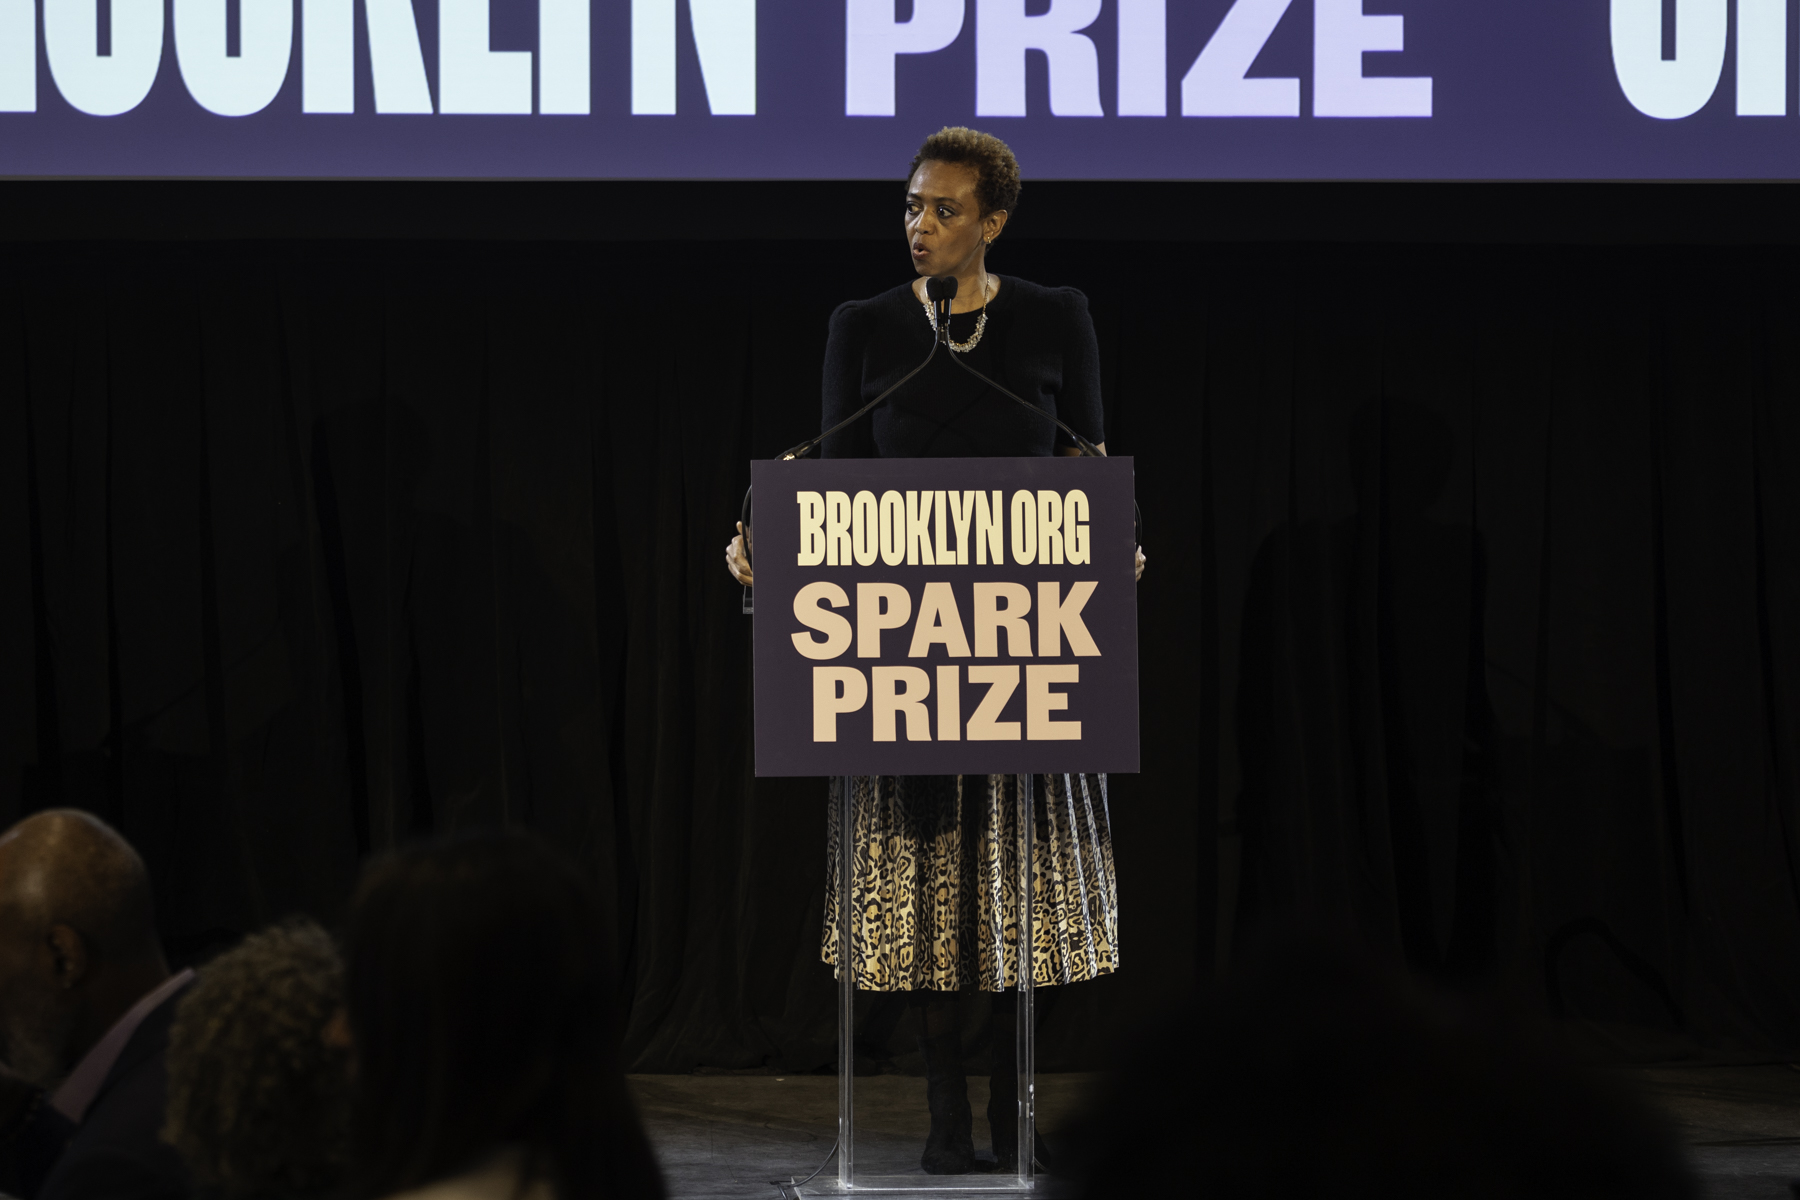 Woman speaking at a podium with the brooklyn spark prize logo.